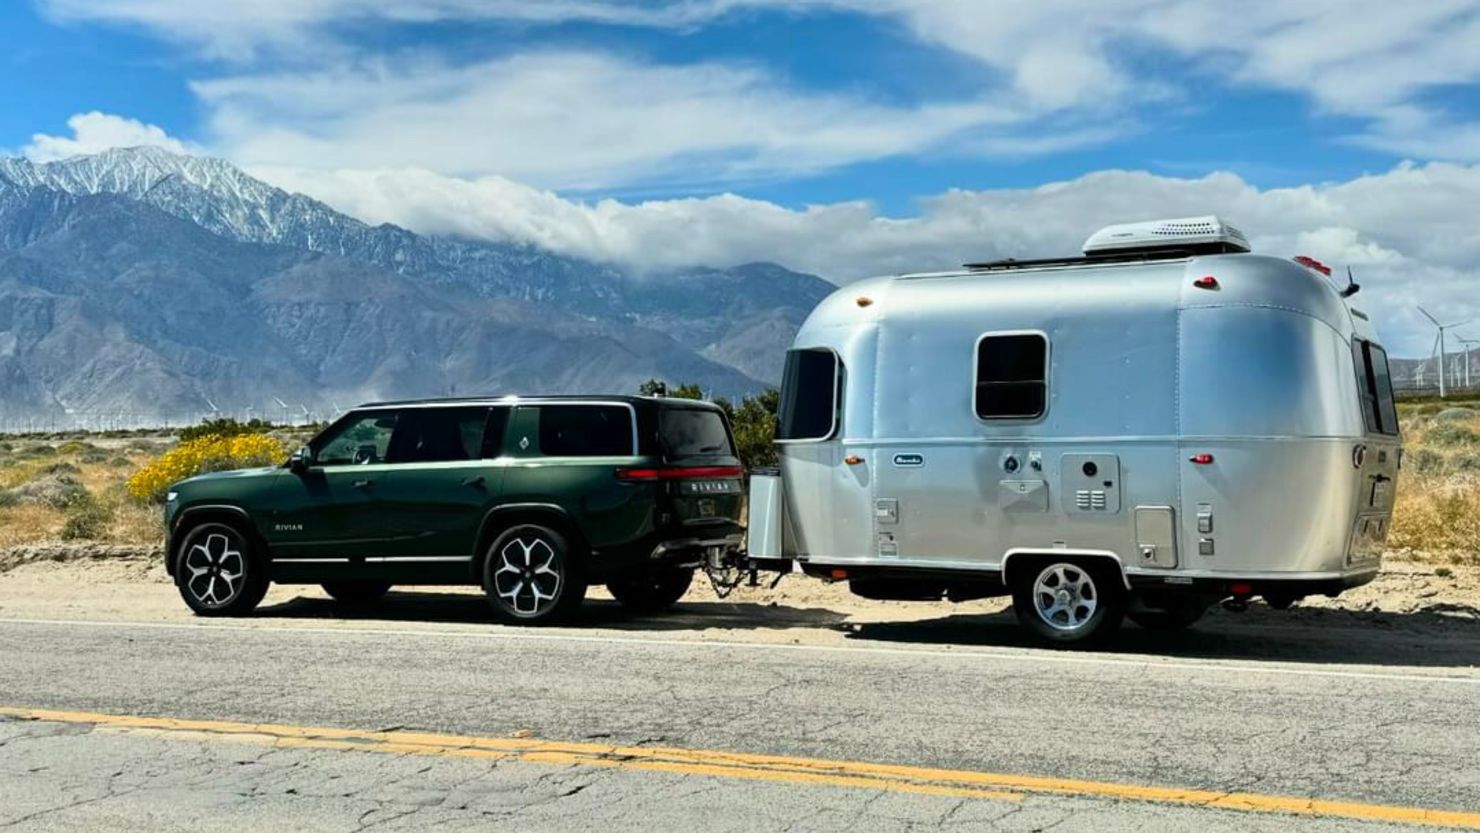 Mike Kowal’s Rivian R1S towing an Airstream trailer on March 24, 2023, in Desert Hot Springs, California.